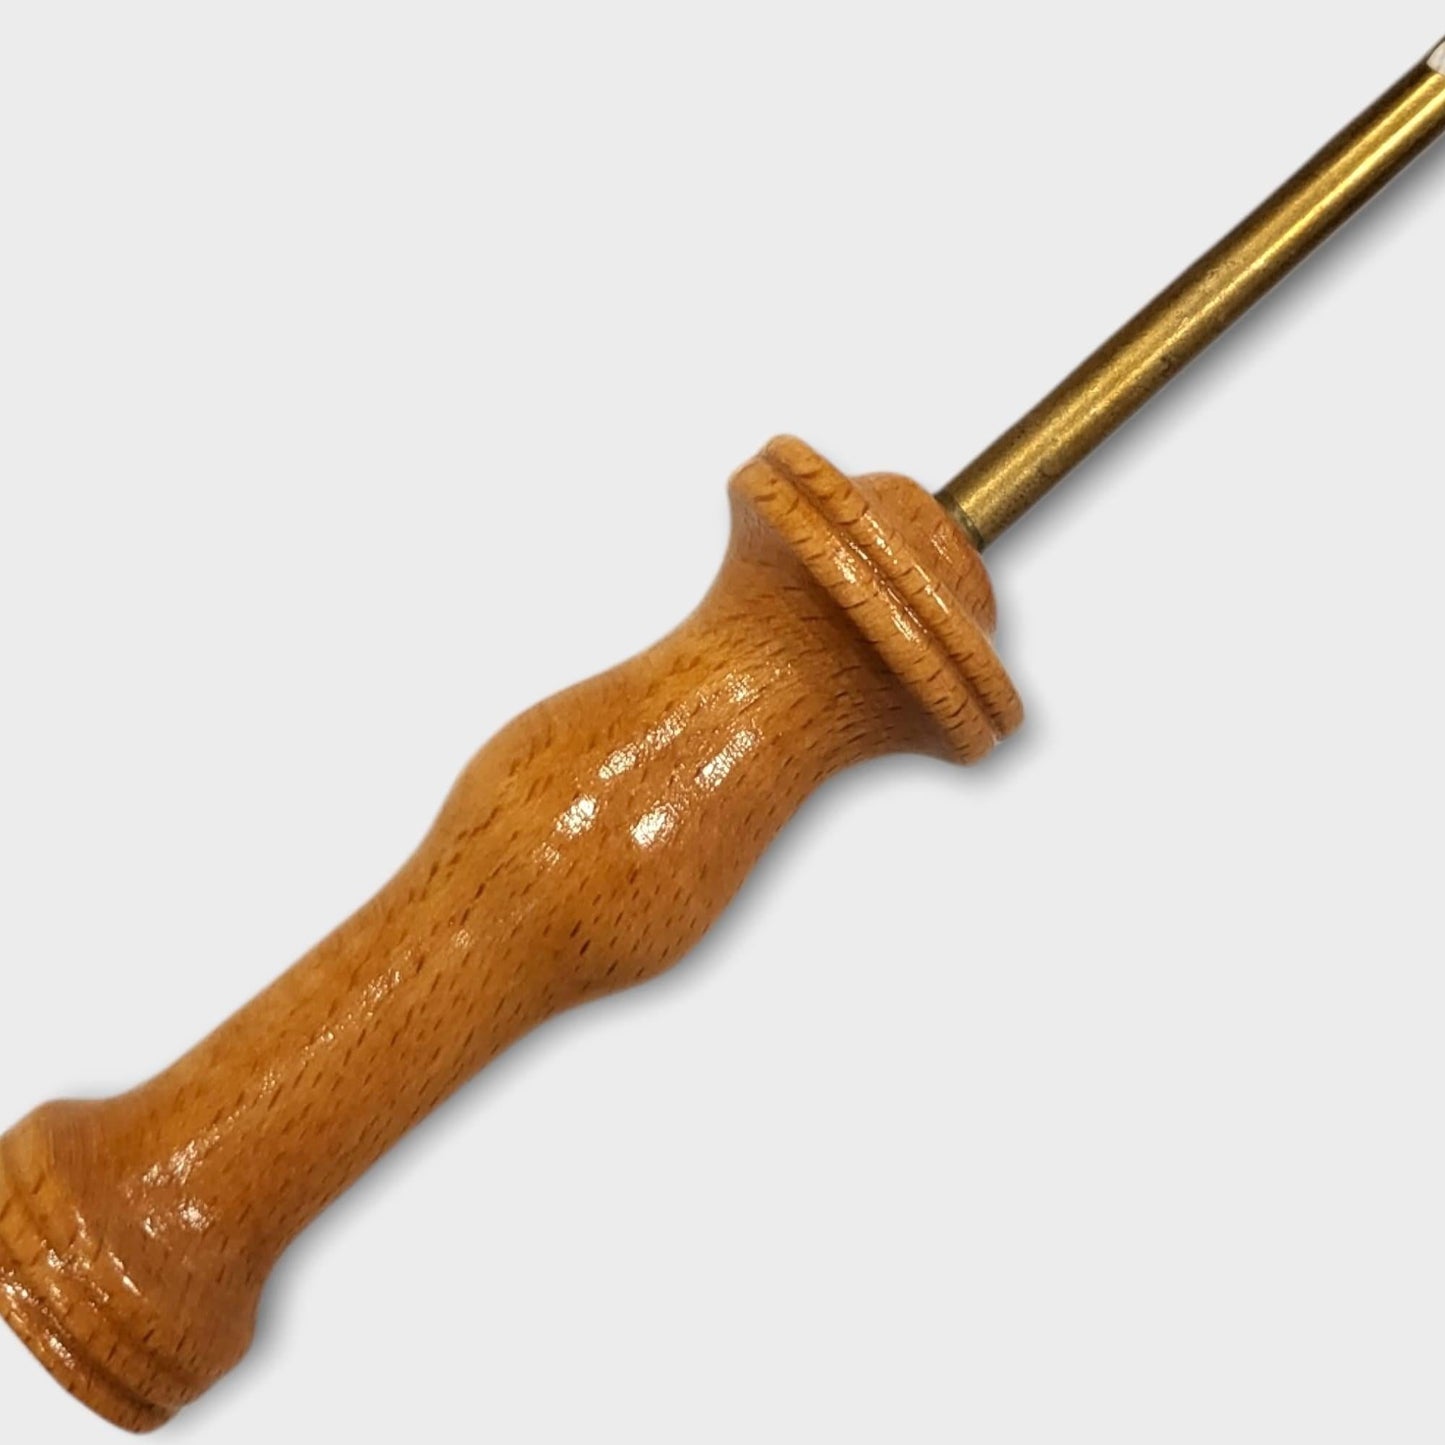 Wooden punch needle - Tuftingshop